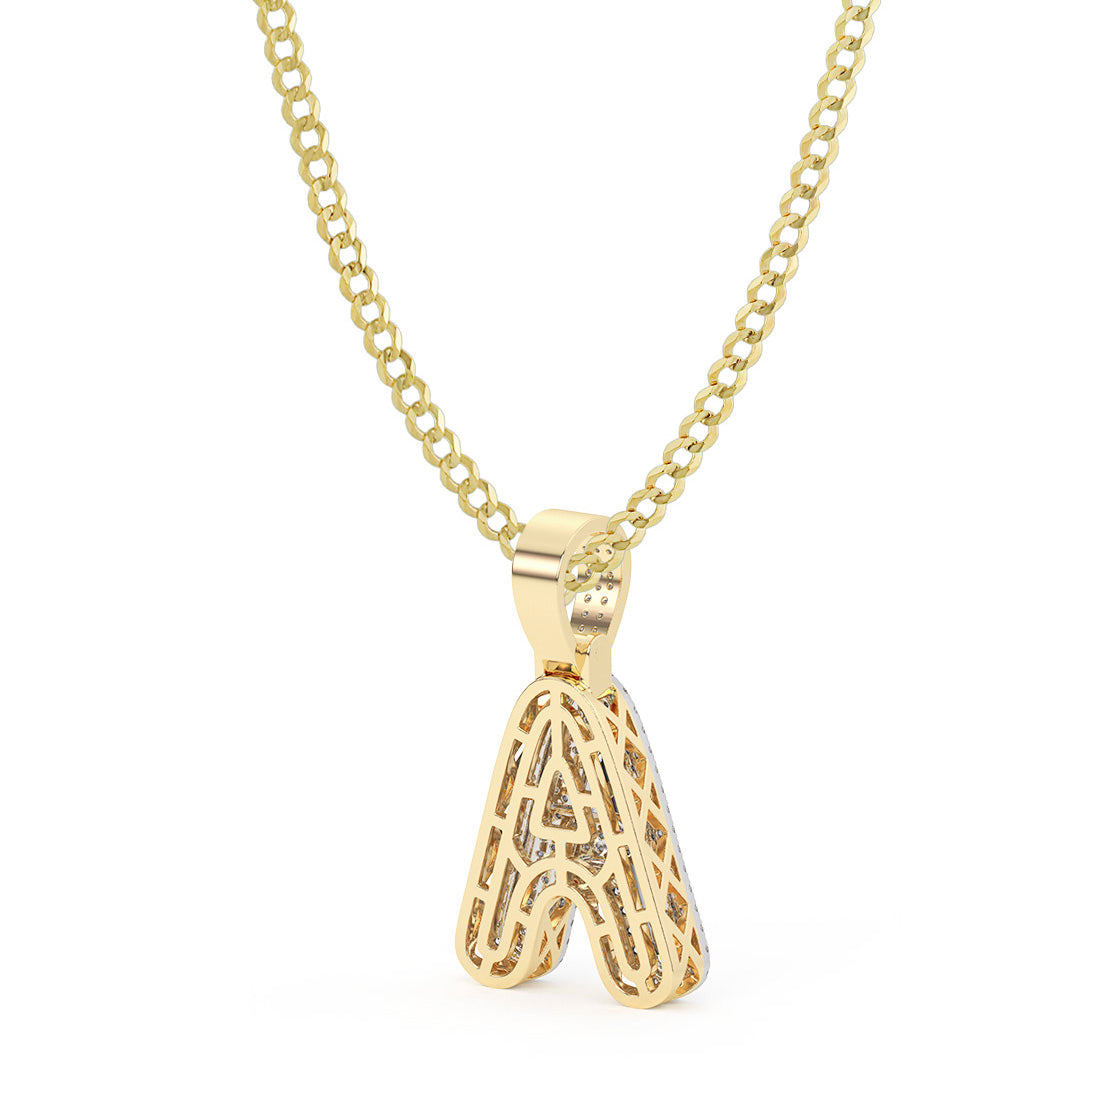 Diamond "A" Initial Letter Necklace 0.37ct Solid 10K Yellow Gold